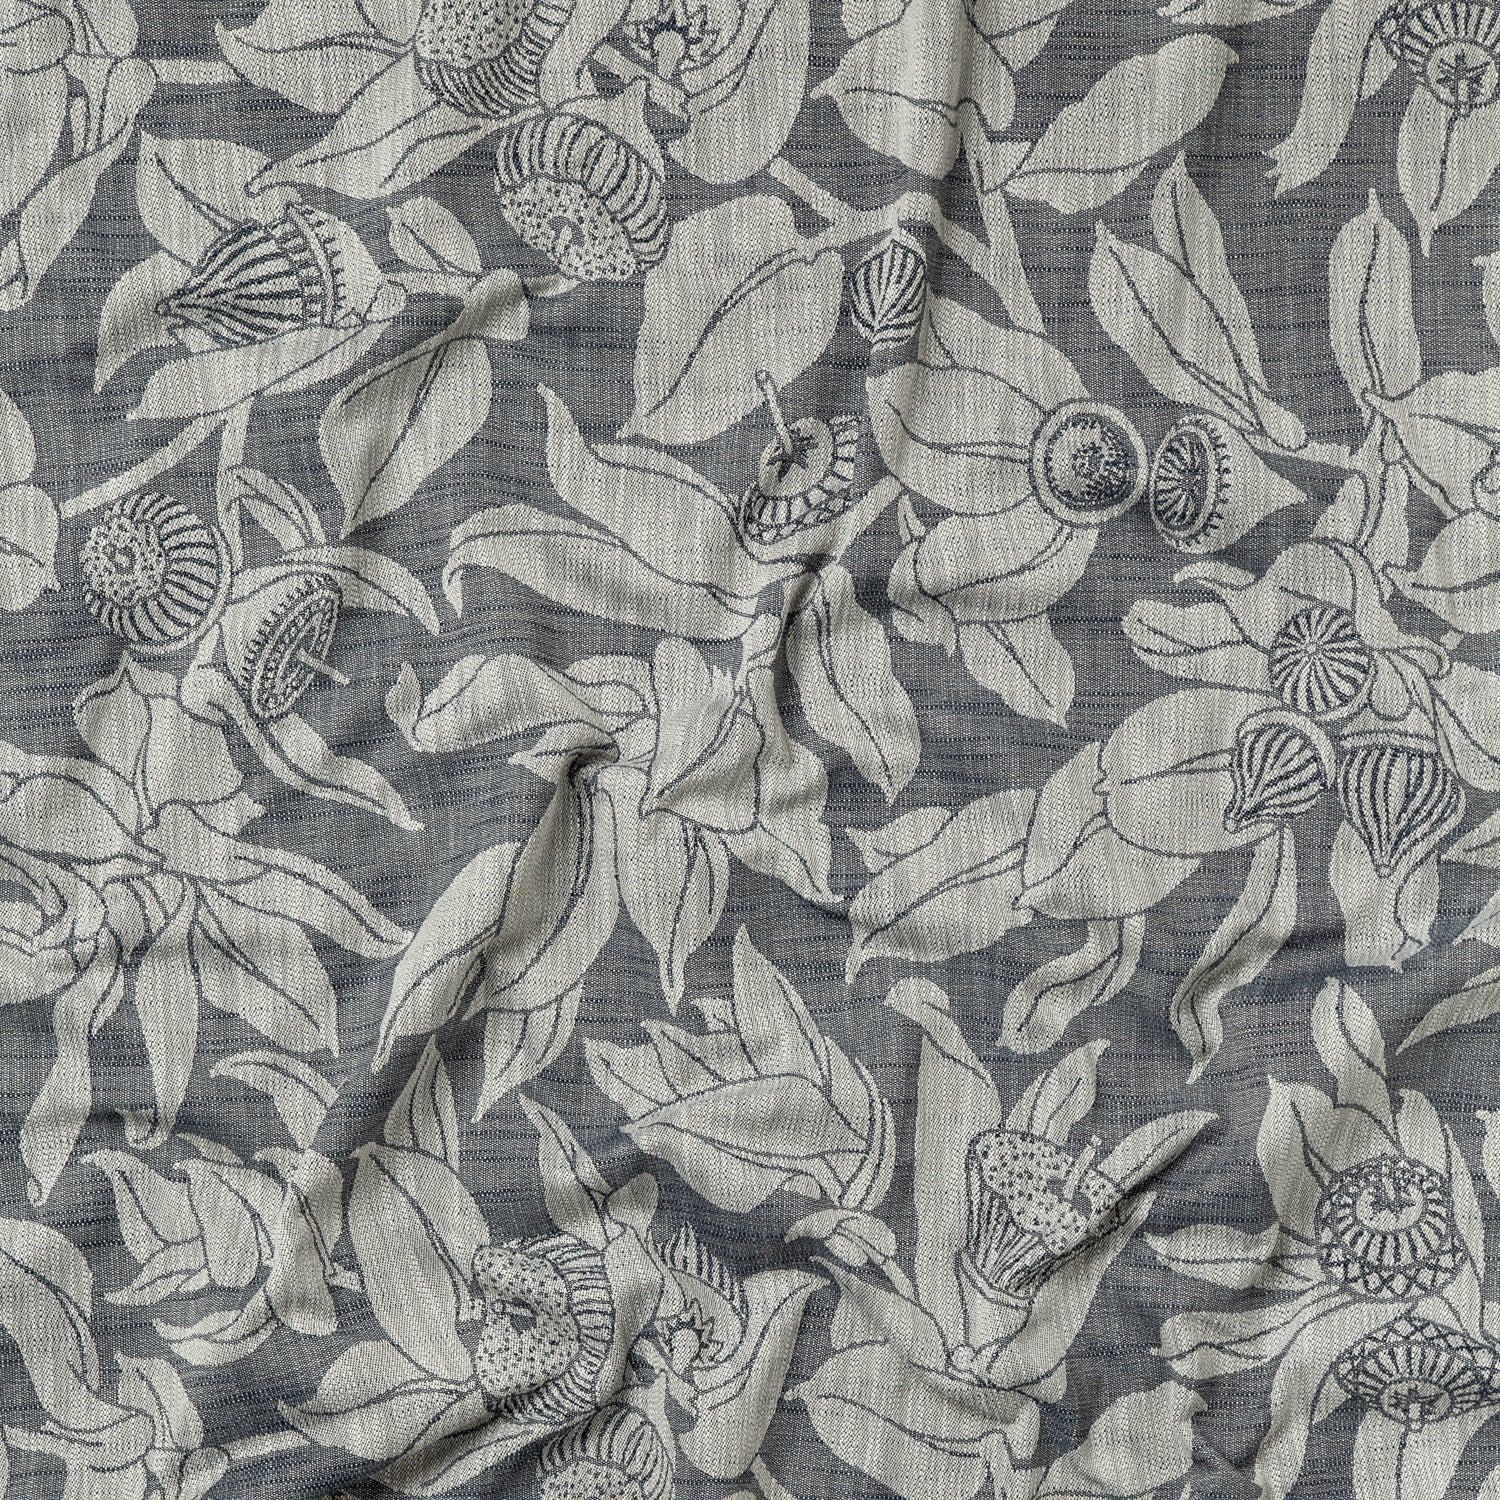 Draped fabric in a leaf and bud print in gray on a dark gray field.